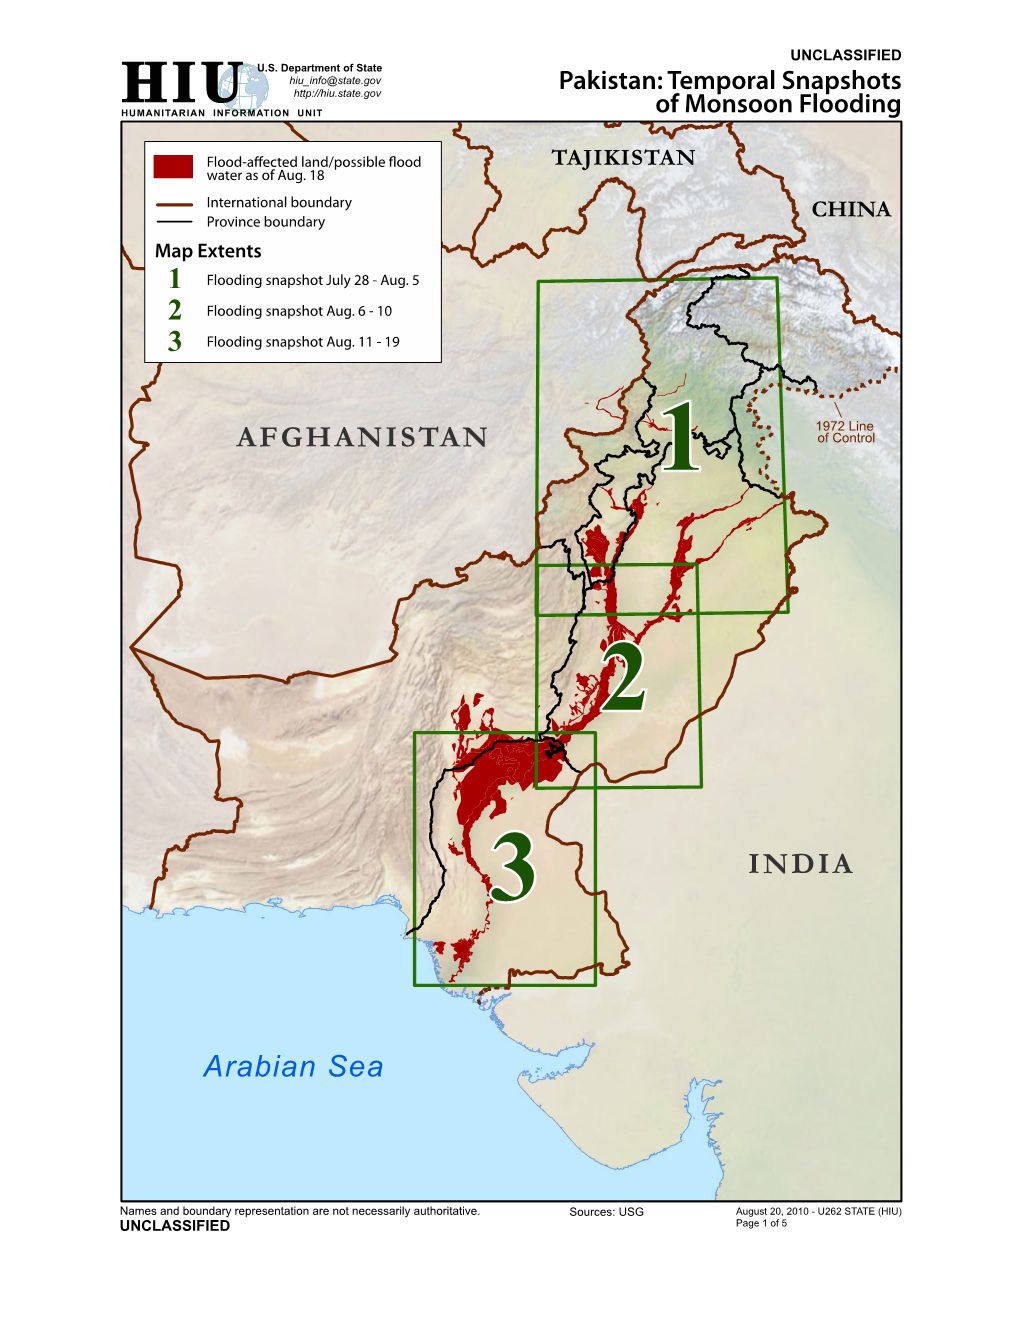 Pak Floods Overview [Converted]